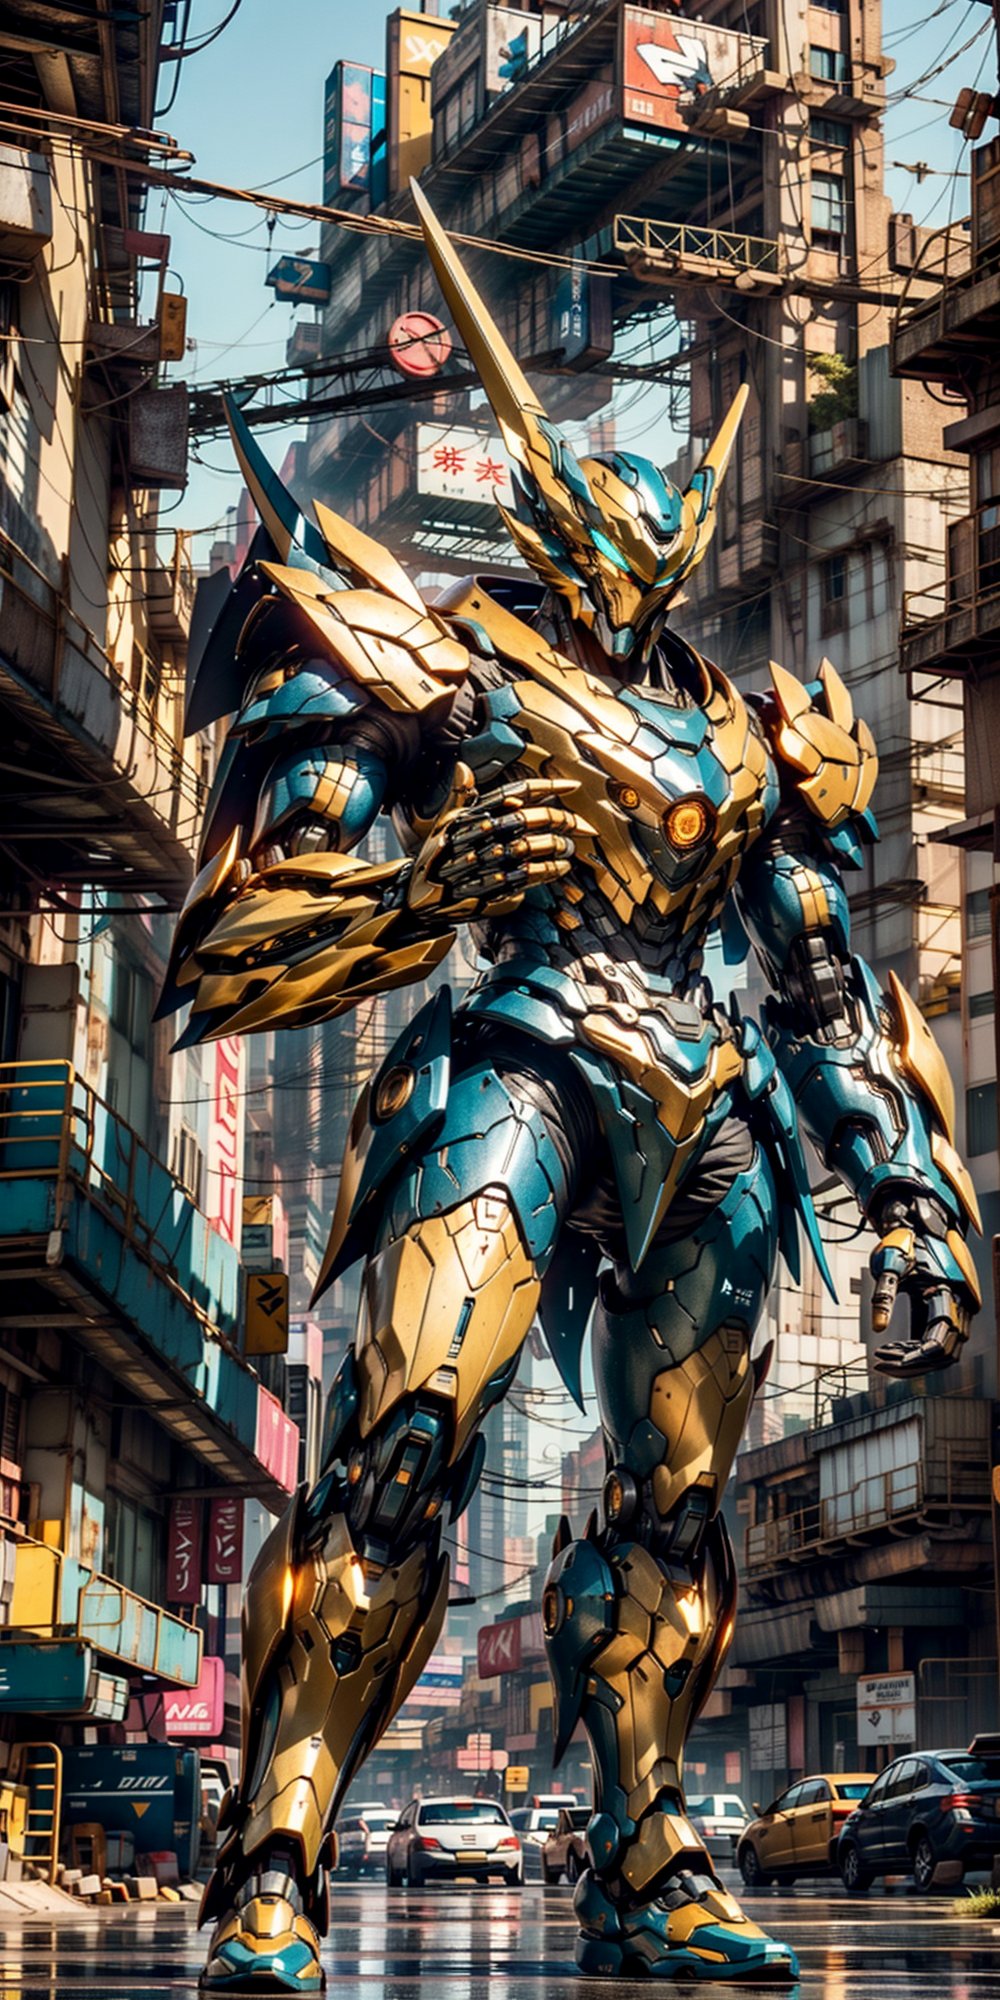 In the neon-lit streets of a cyberpunk metropolis, a Hi-Tech swordsman emerges as a beacon of futuristic prowess. Encased in a robotic suit of red and blue armor, he stands within a pulsating cocoon of yellow luminescence. The armor's intricate details reflect the advanced technology that defines this world.

At his side, a custom cyber-style sword gleams with an otherworldly radiance, its blade a fusion of artistry and advanced engineering. The streets behind him are awash in the vibrant glow of neon signs and holographic advertisements, painting a vivid backdrop to his enigmatic presence.

The image captures every gleam and glint in astonishing 4K Ultra HDR quality, enhancing the fine details of the cybernetic armor and the interplay of light and shadow in the urban setting. This scene encapsulates the essence of cyberpunk's high-tech aesthetics, delivering an image that seamlessly marries advanced technology with cutting-edge style.